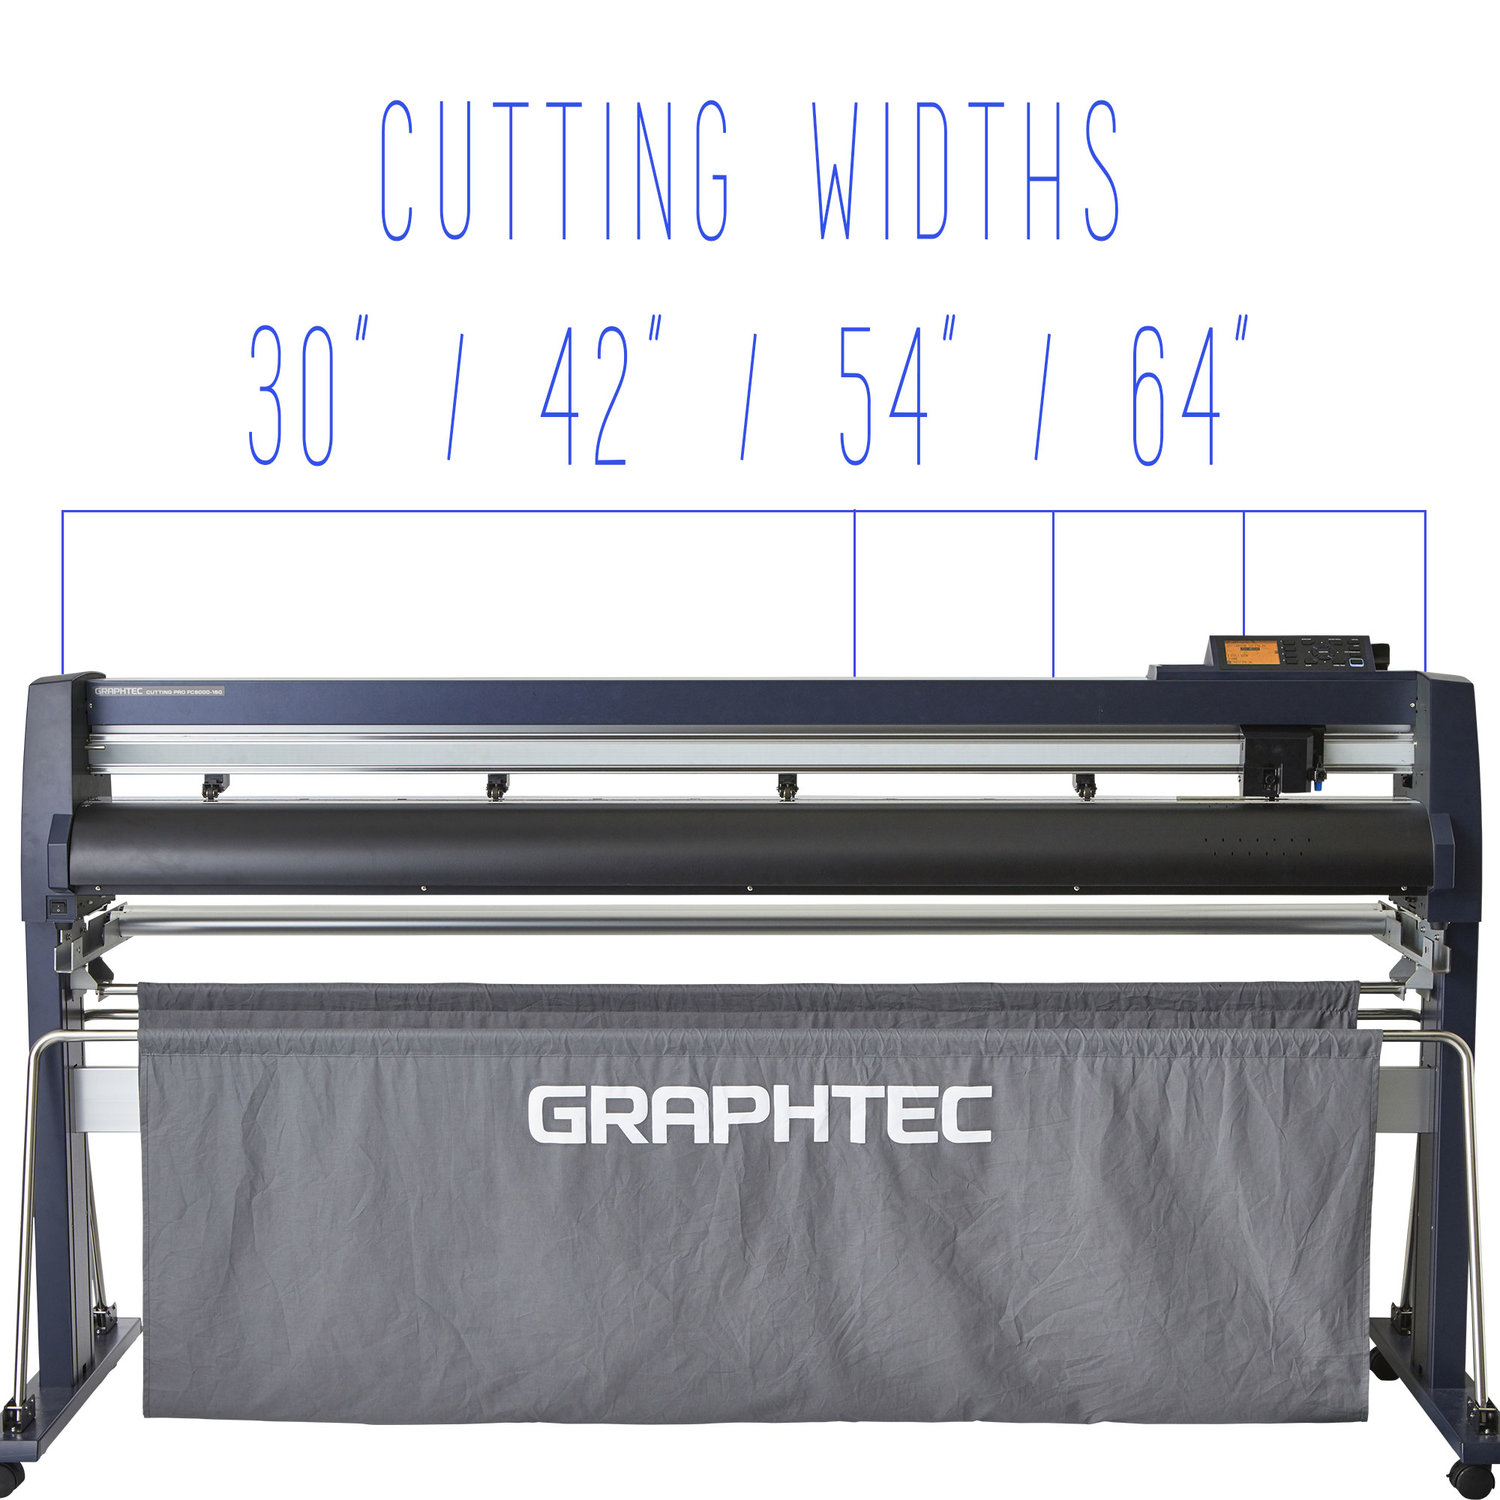 Graphtec 54" Roll Feed Wide Cutter (FC9000-140)